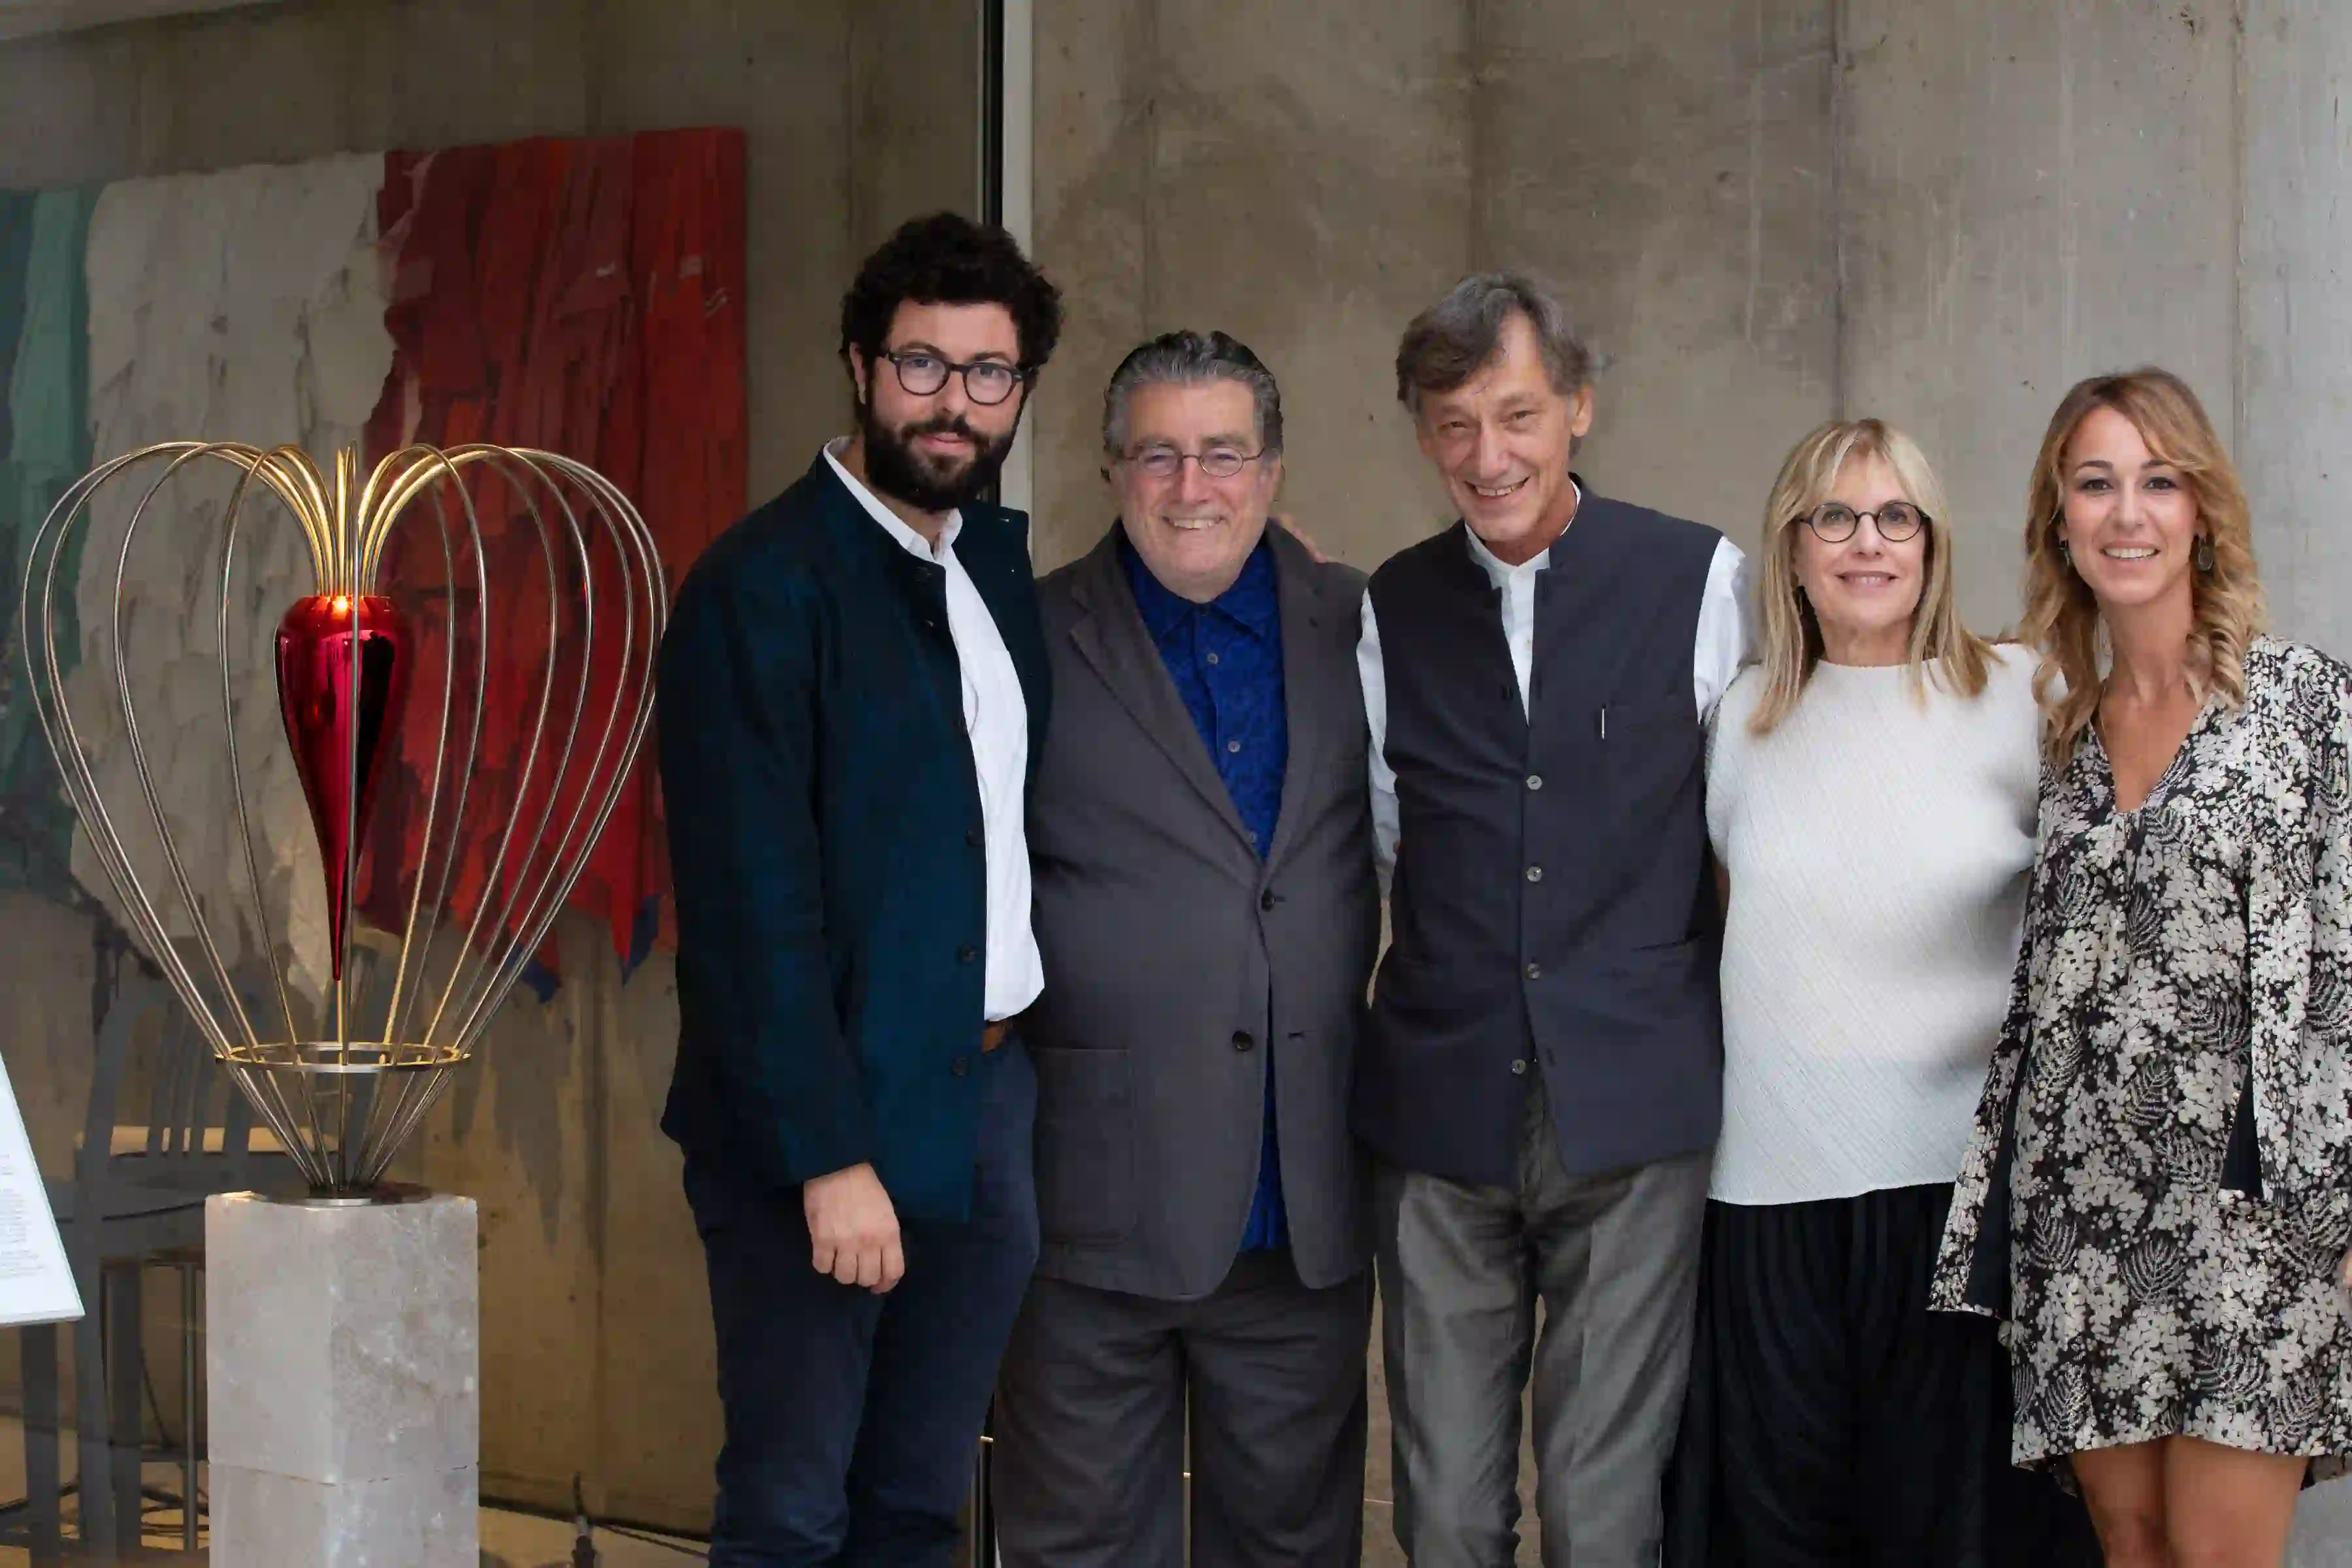 From left to right: Director Vittorio Calabrese, Co-founder Giorgio Spanu, artist Marco Bagnoli, and Co-founder Nancy Olnick